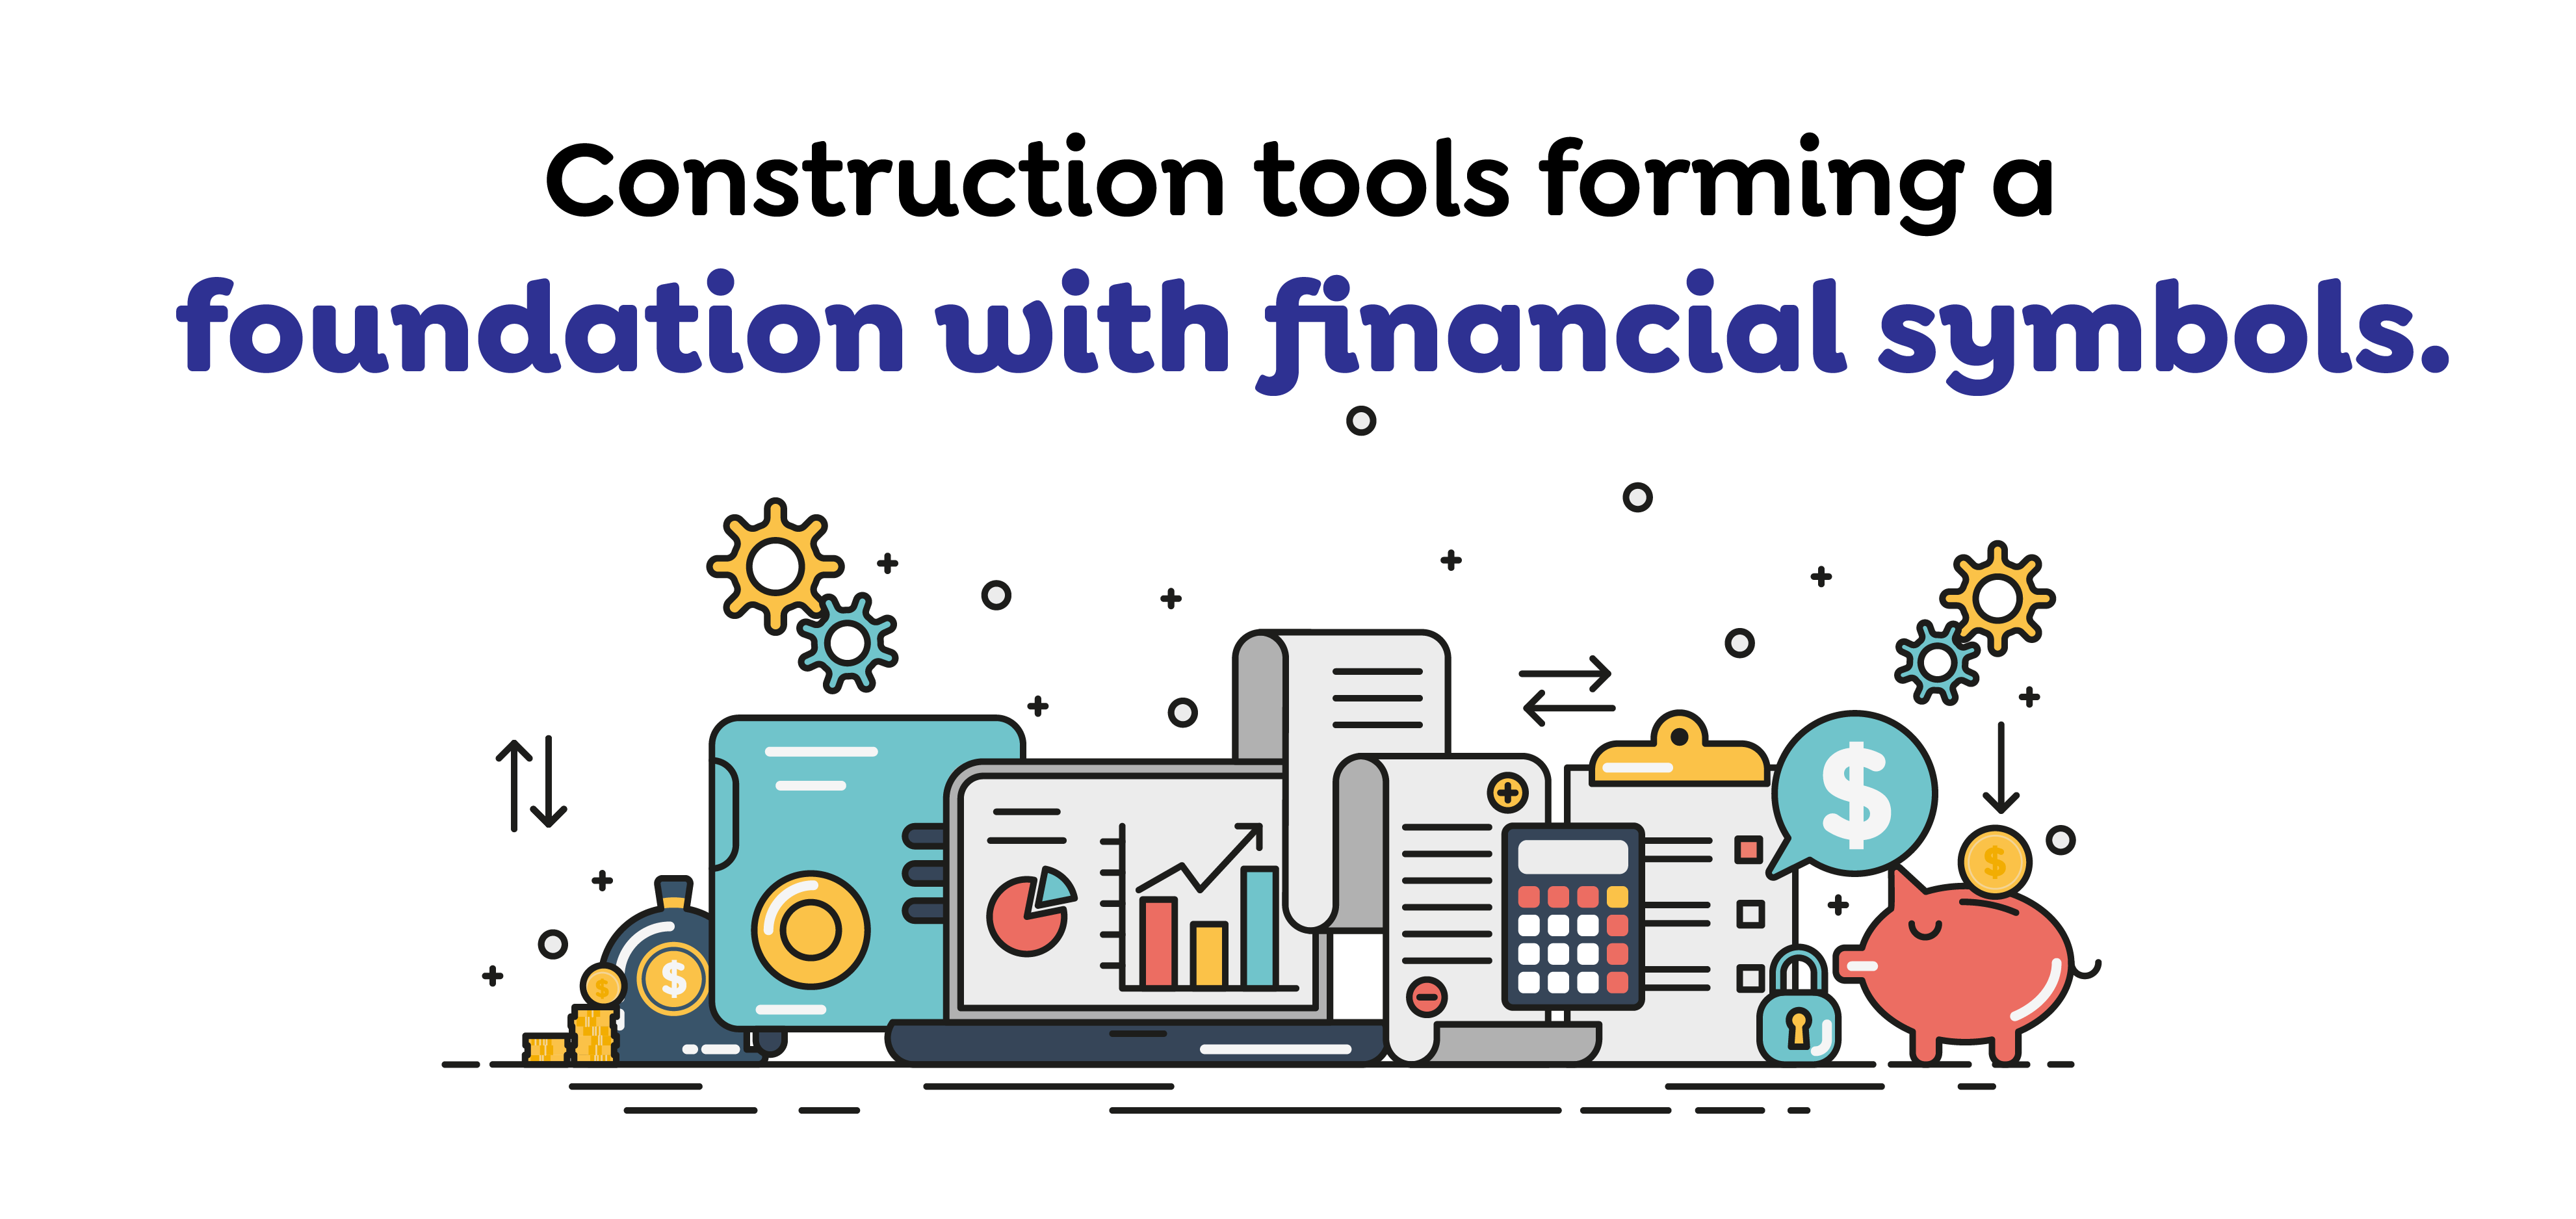 Construction tools forming a foundation with financial symbols